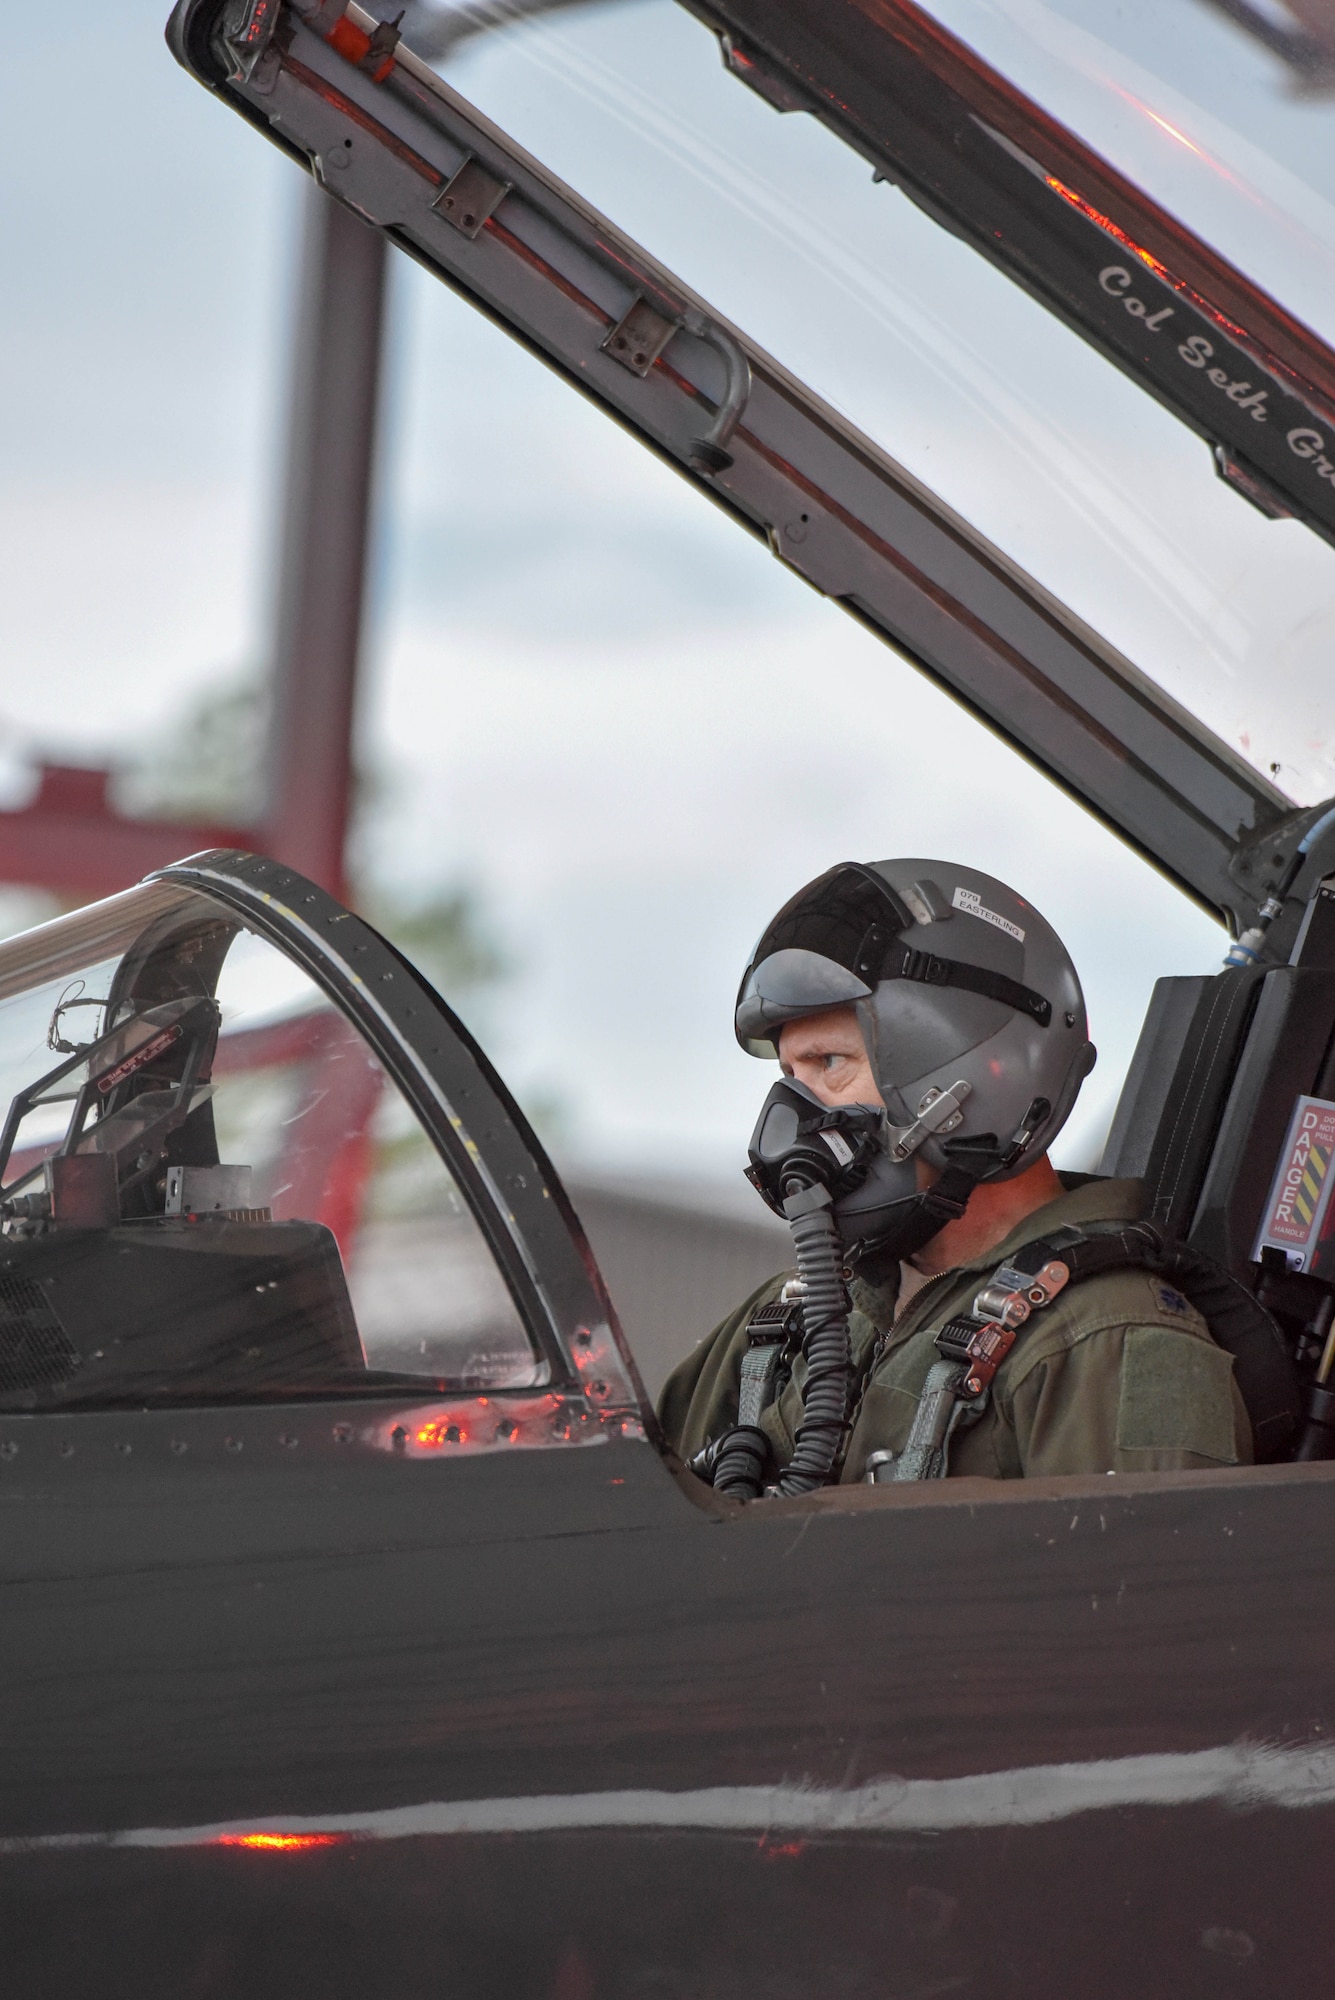 U.S. Air Force Lt. Col. David Easterling Jr., 43rd Flying Training Squadron instructor pilot, goes through system checks in the cockpit of a T-38 Talon on September 23, 2020, at Columbus Air Force Base, Miss. The T-38 incorporates a "glass cockpit" with integrated avionics displays, head-up display and an electronic "no drop bomb" scoring system. (U.S. Air Force photo by Airman 1st Class Davis Donaldson)